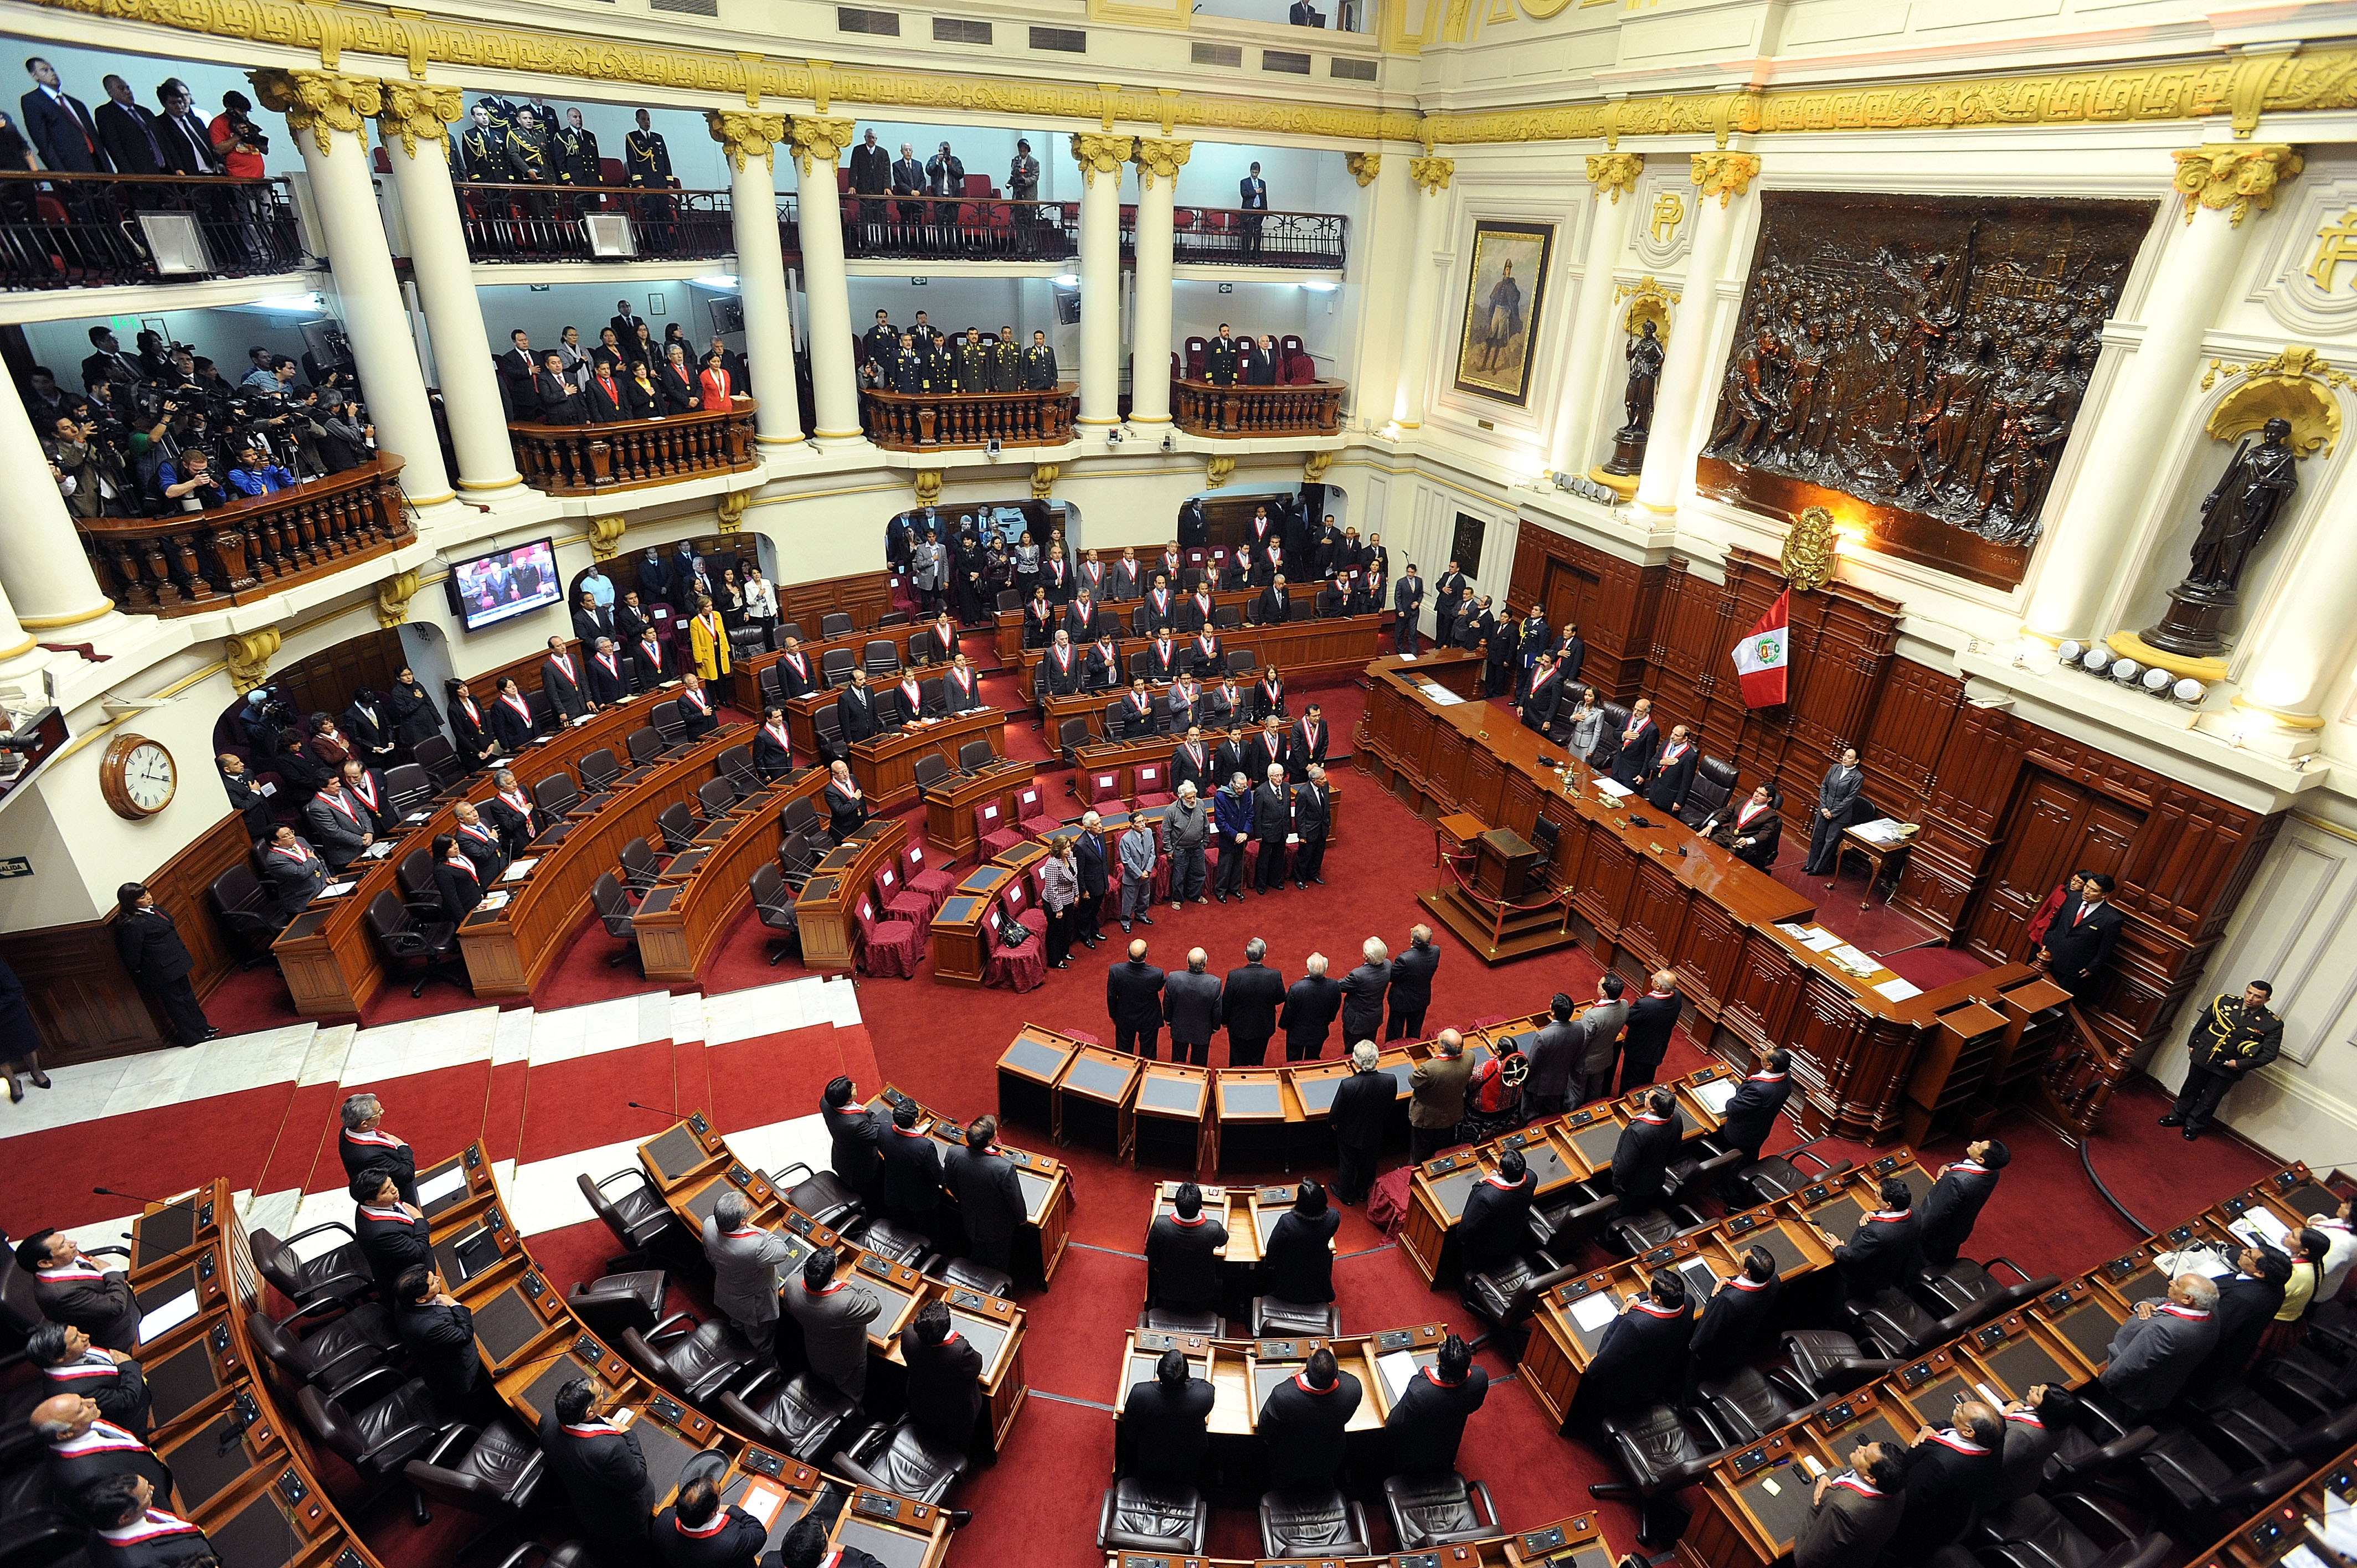 Peru’s Congress approves first ever plenary session dedicated to women